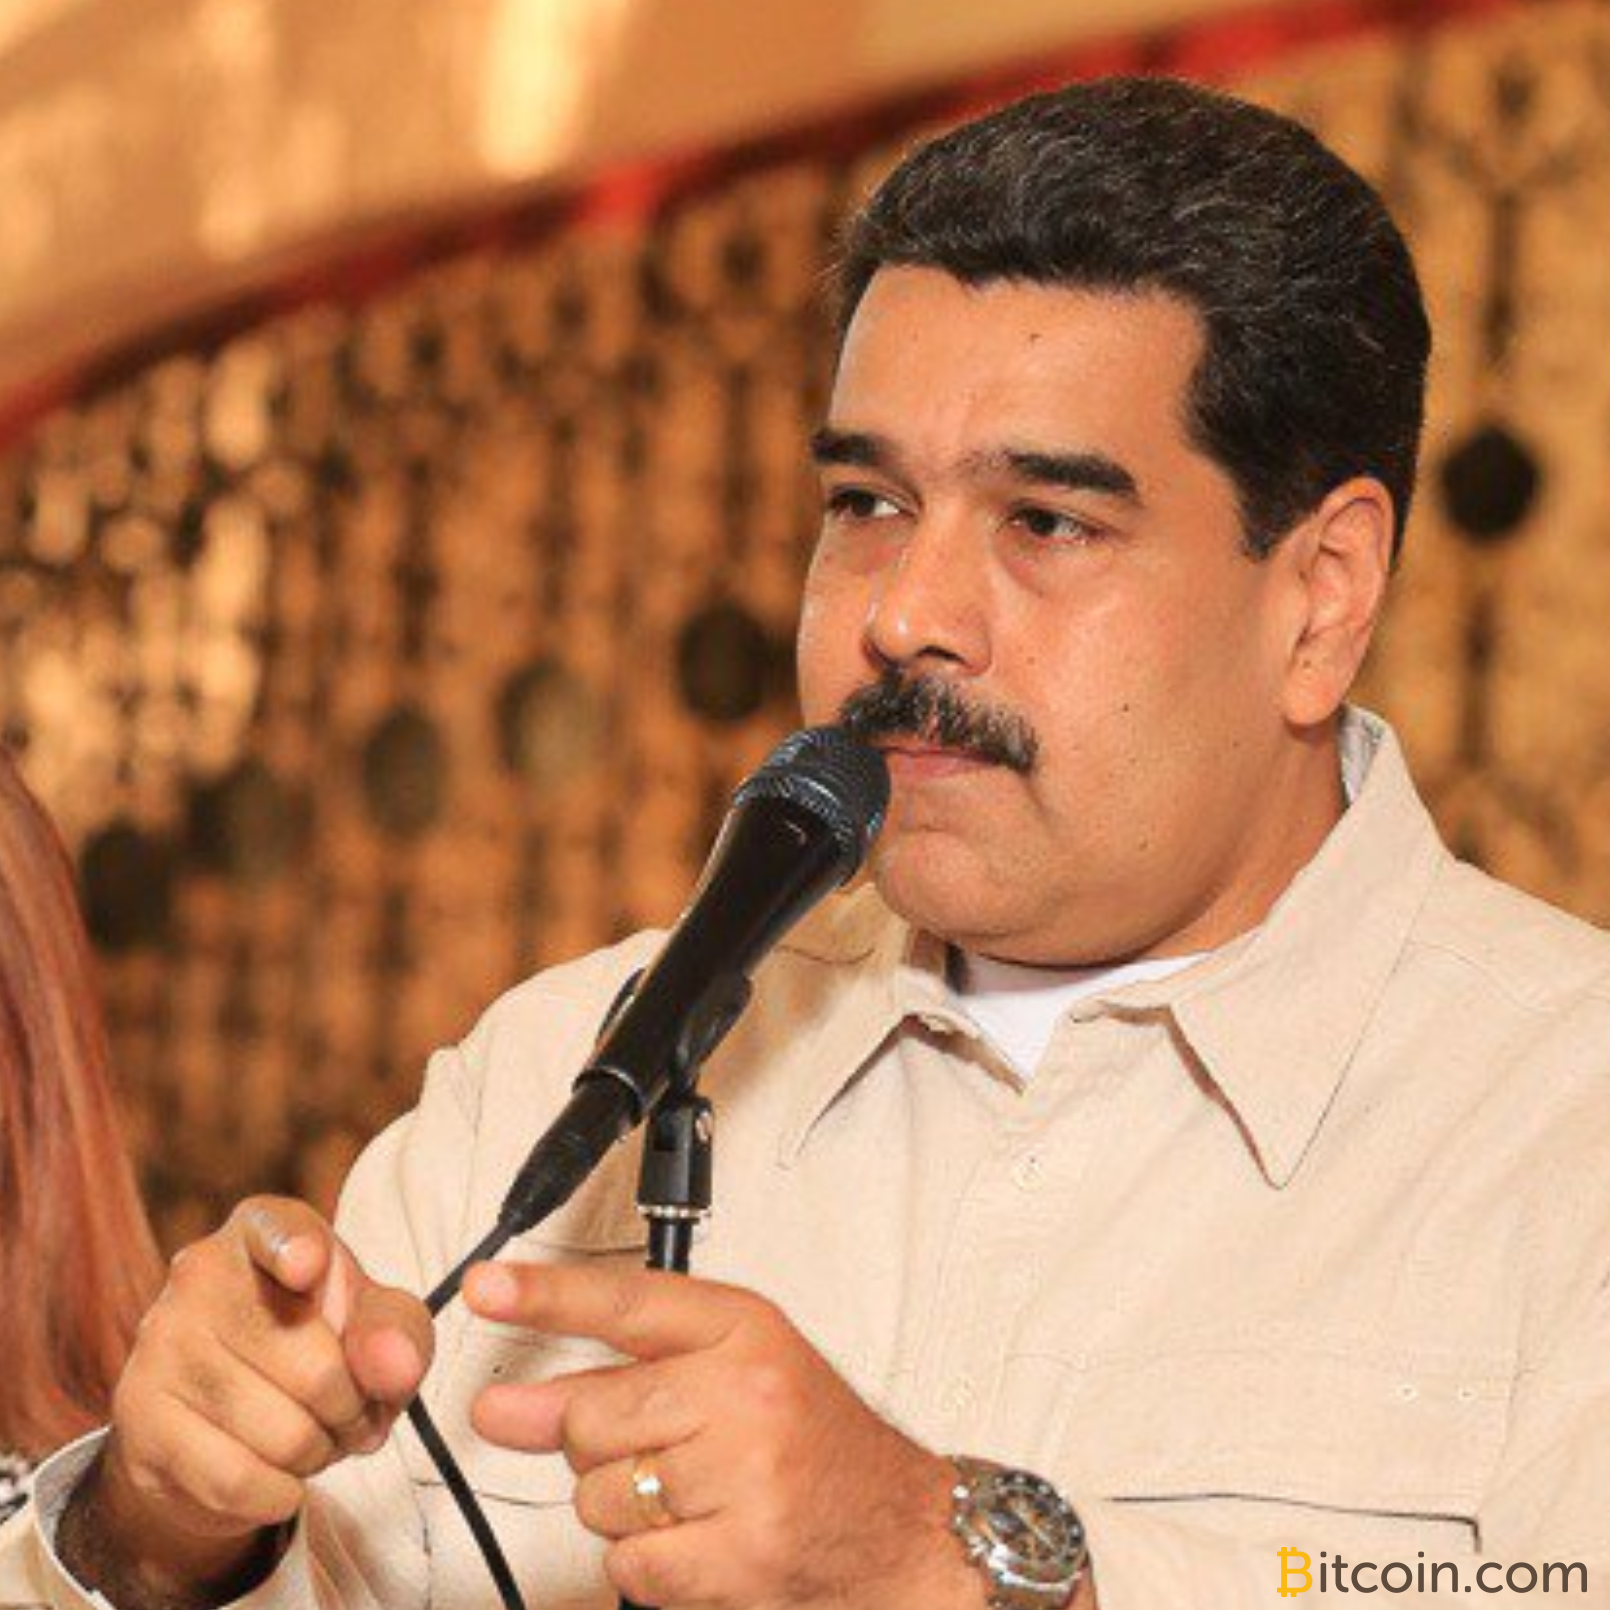 Maduro Asks Venezuela's Banks to Mine and Use Cryptocurrency - Unions Outraged